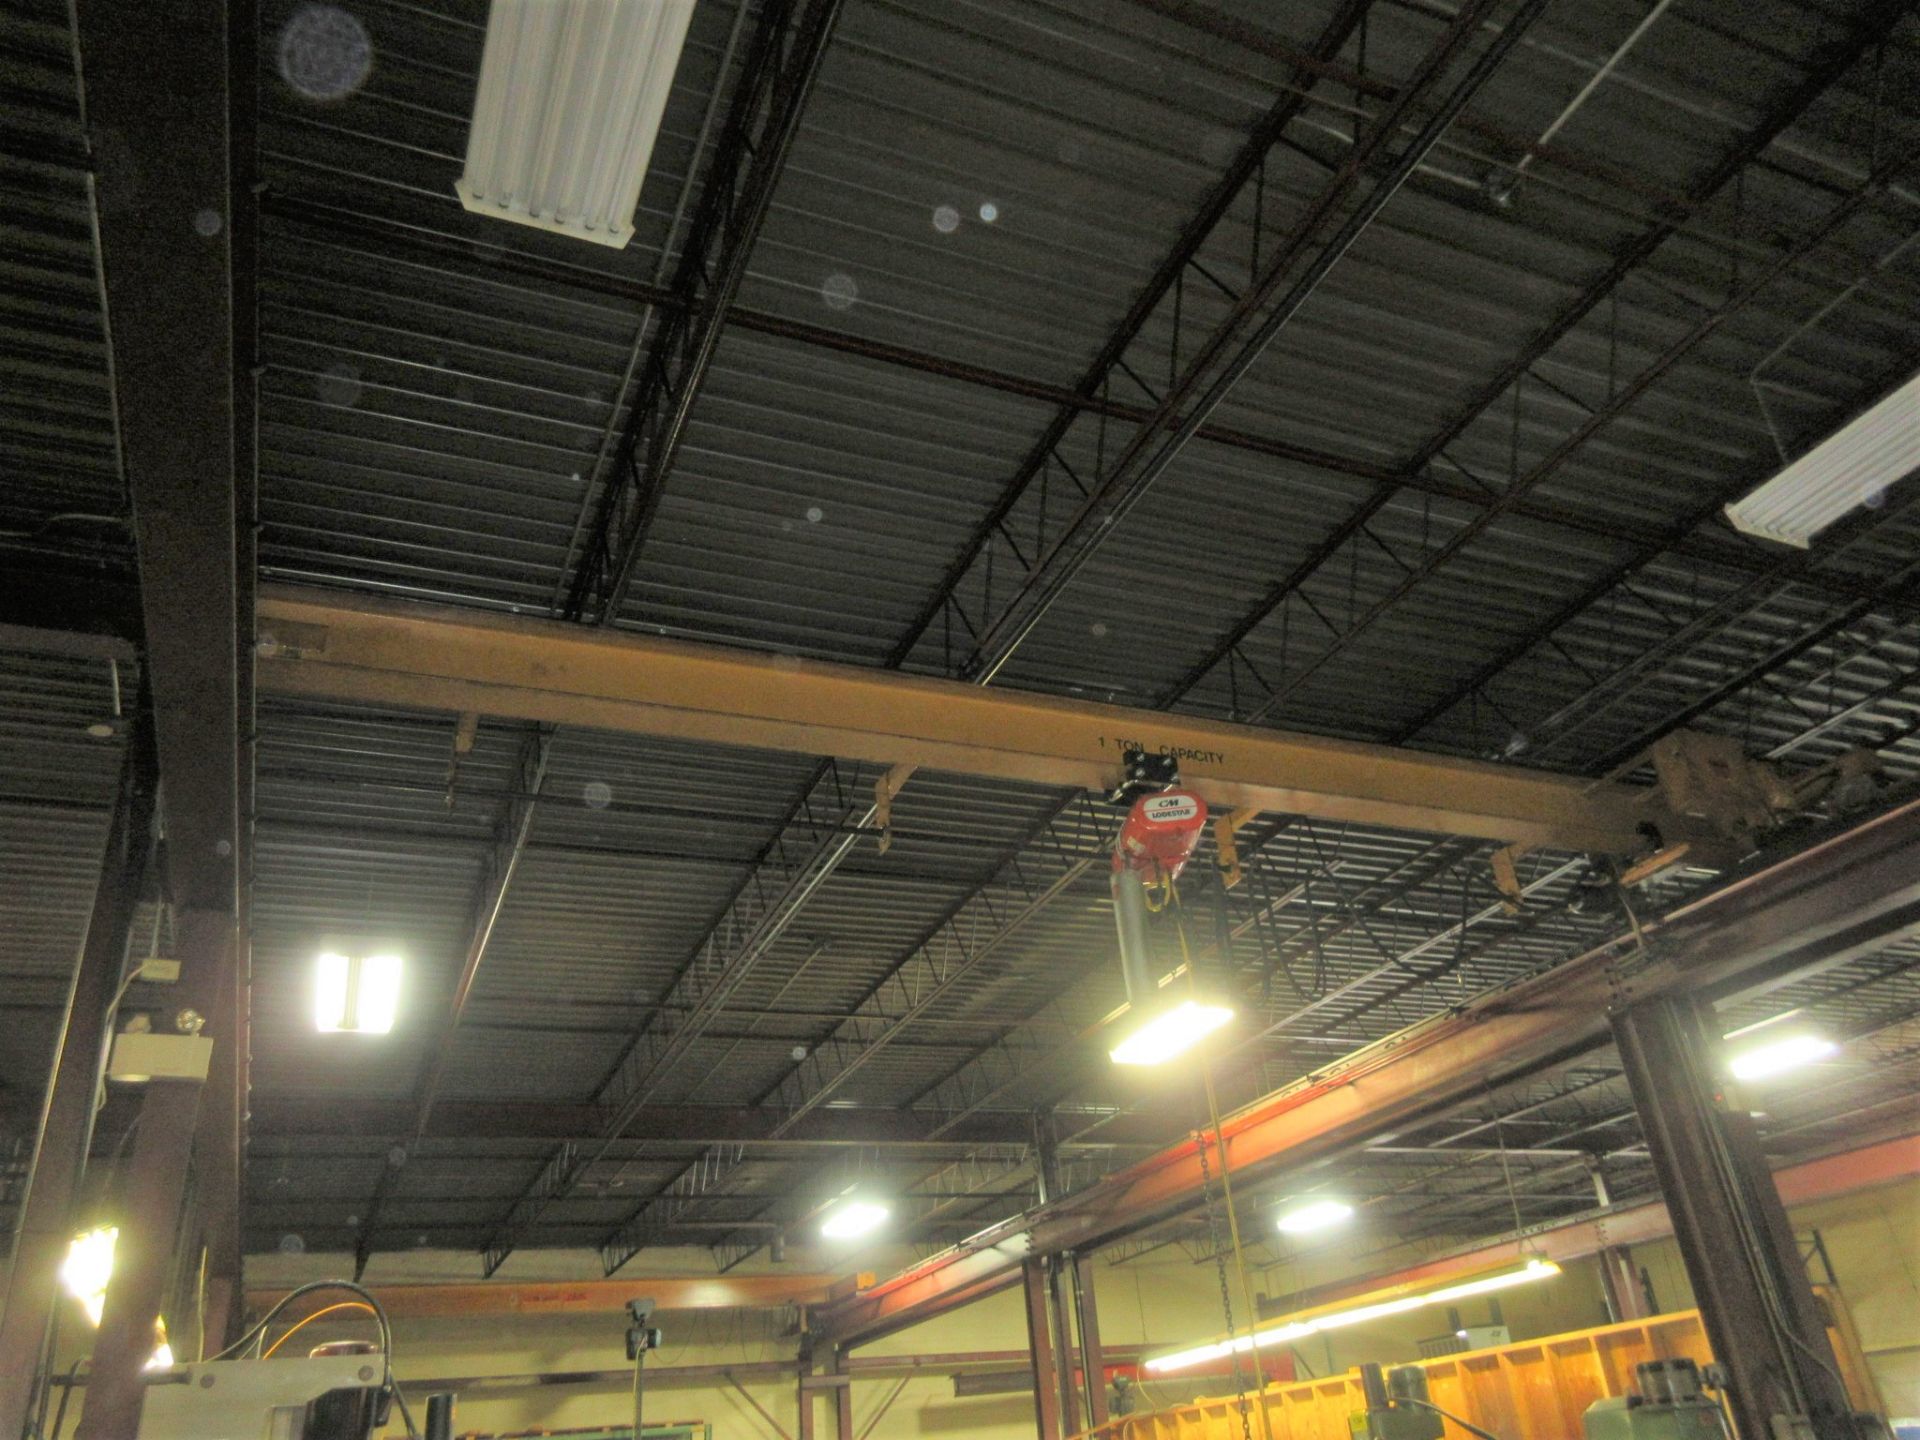 FREE STANDING CRANE SYSTEM, APPROX. 24'W X 225' RUNWAY W/ (14) SUPPORTS & BUS BAR (RUNWAY AND